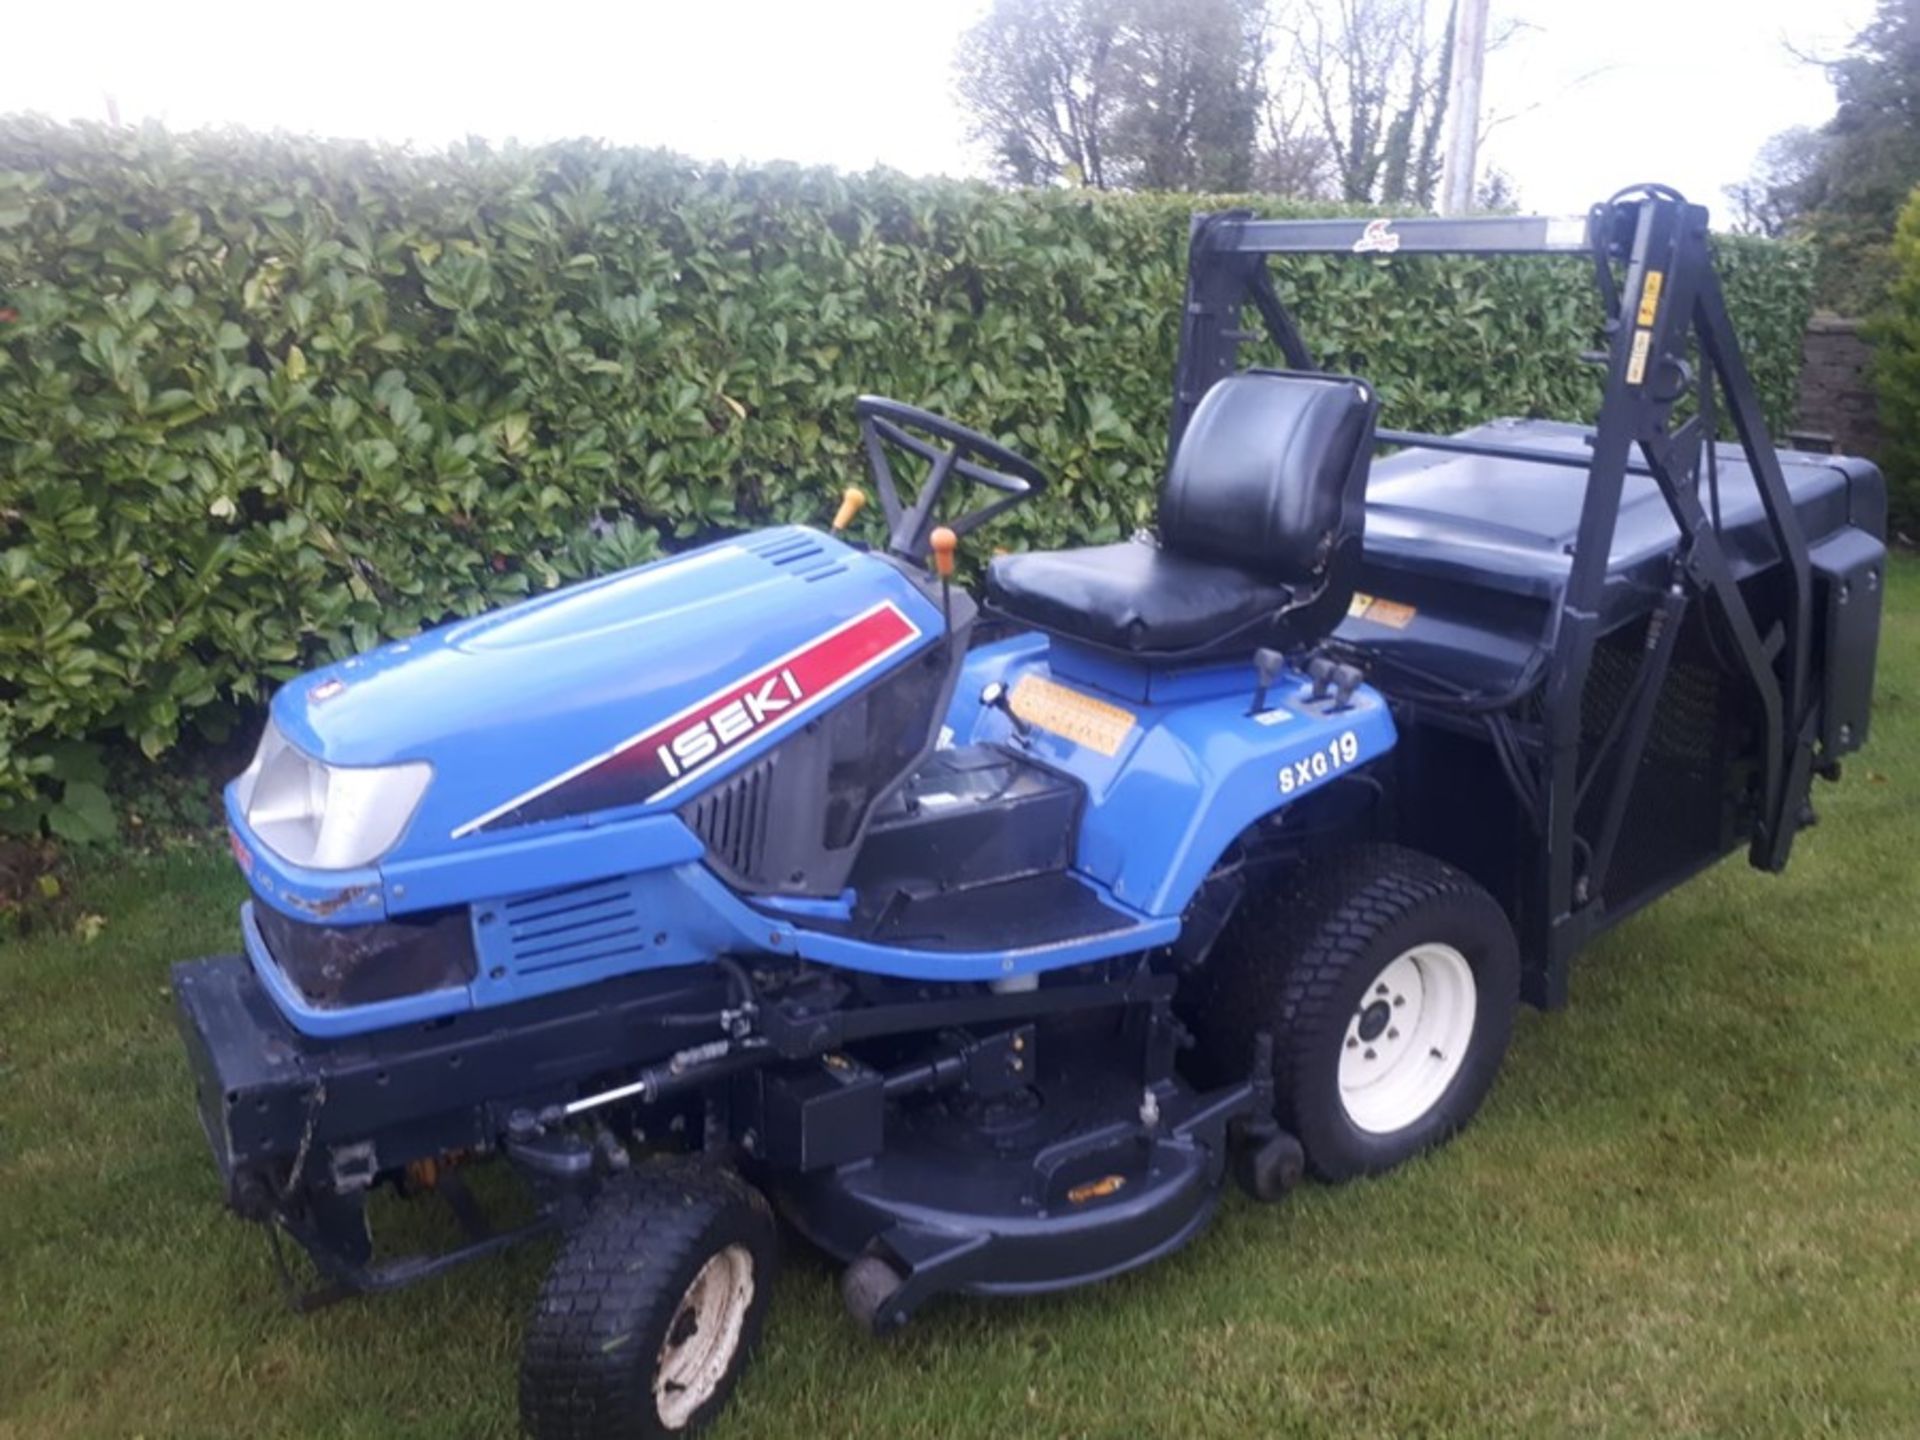 ISEKI SXG 19 diesel ride on mower with 52" cut. Hydro static. High tip. Great condition. FULLY